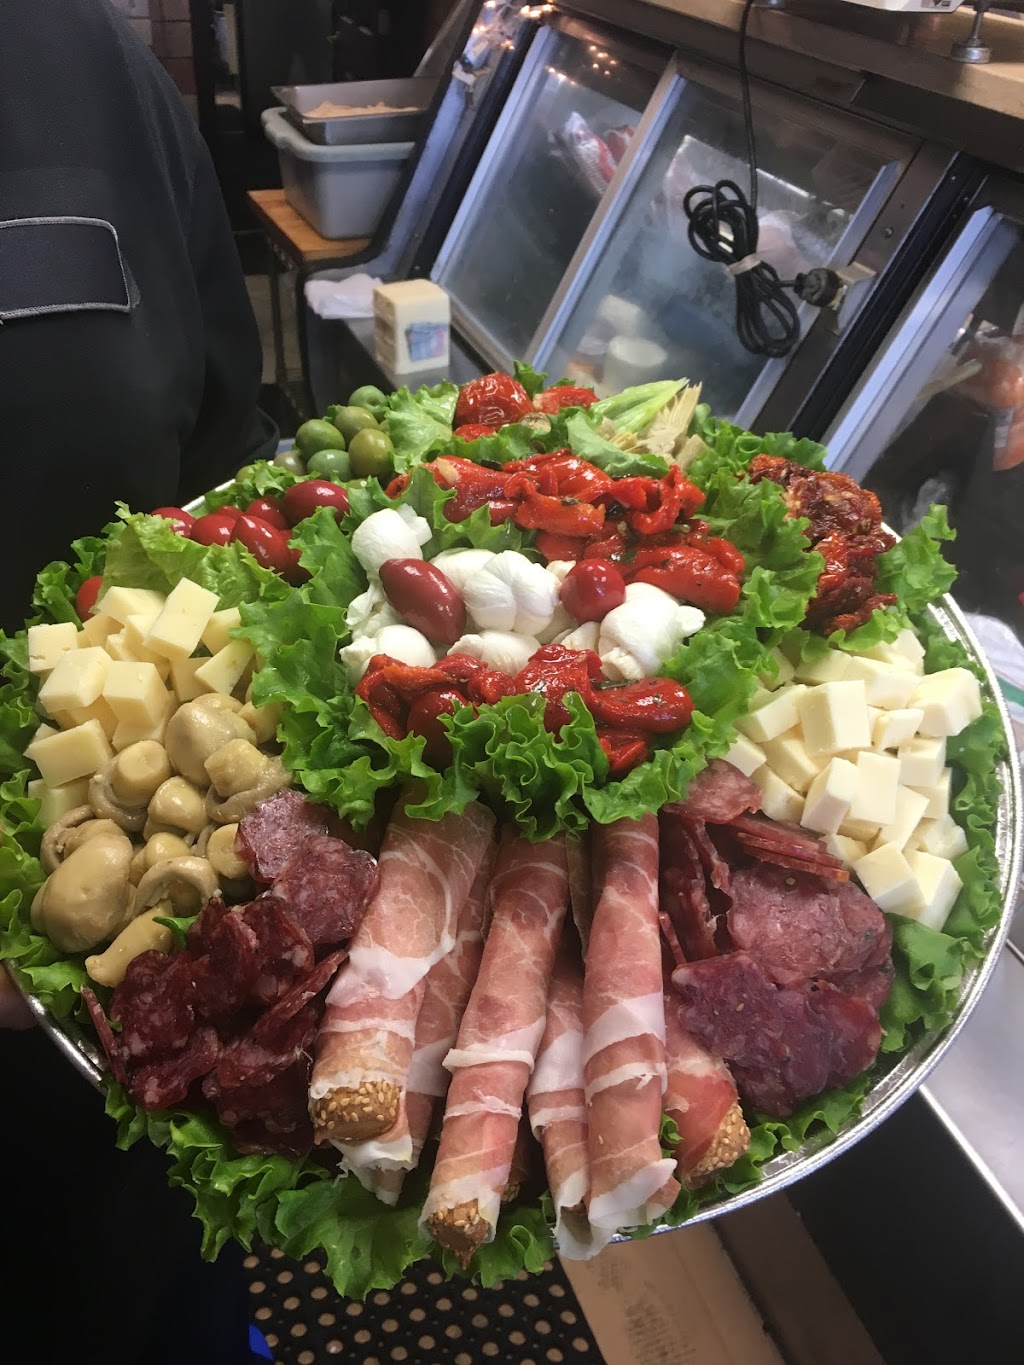 Giovannis Delicatessen & Catering | 146 Lincoln Ave, Eastchester, NY 10709 | Phone: (914) 793-0414